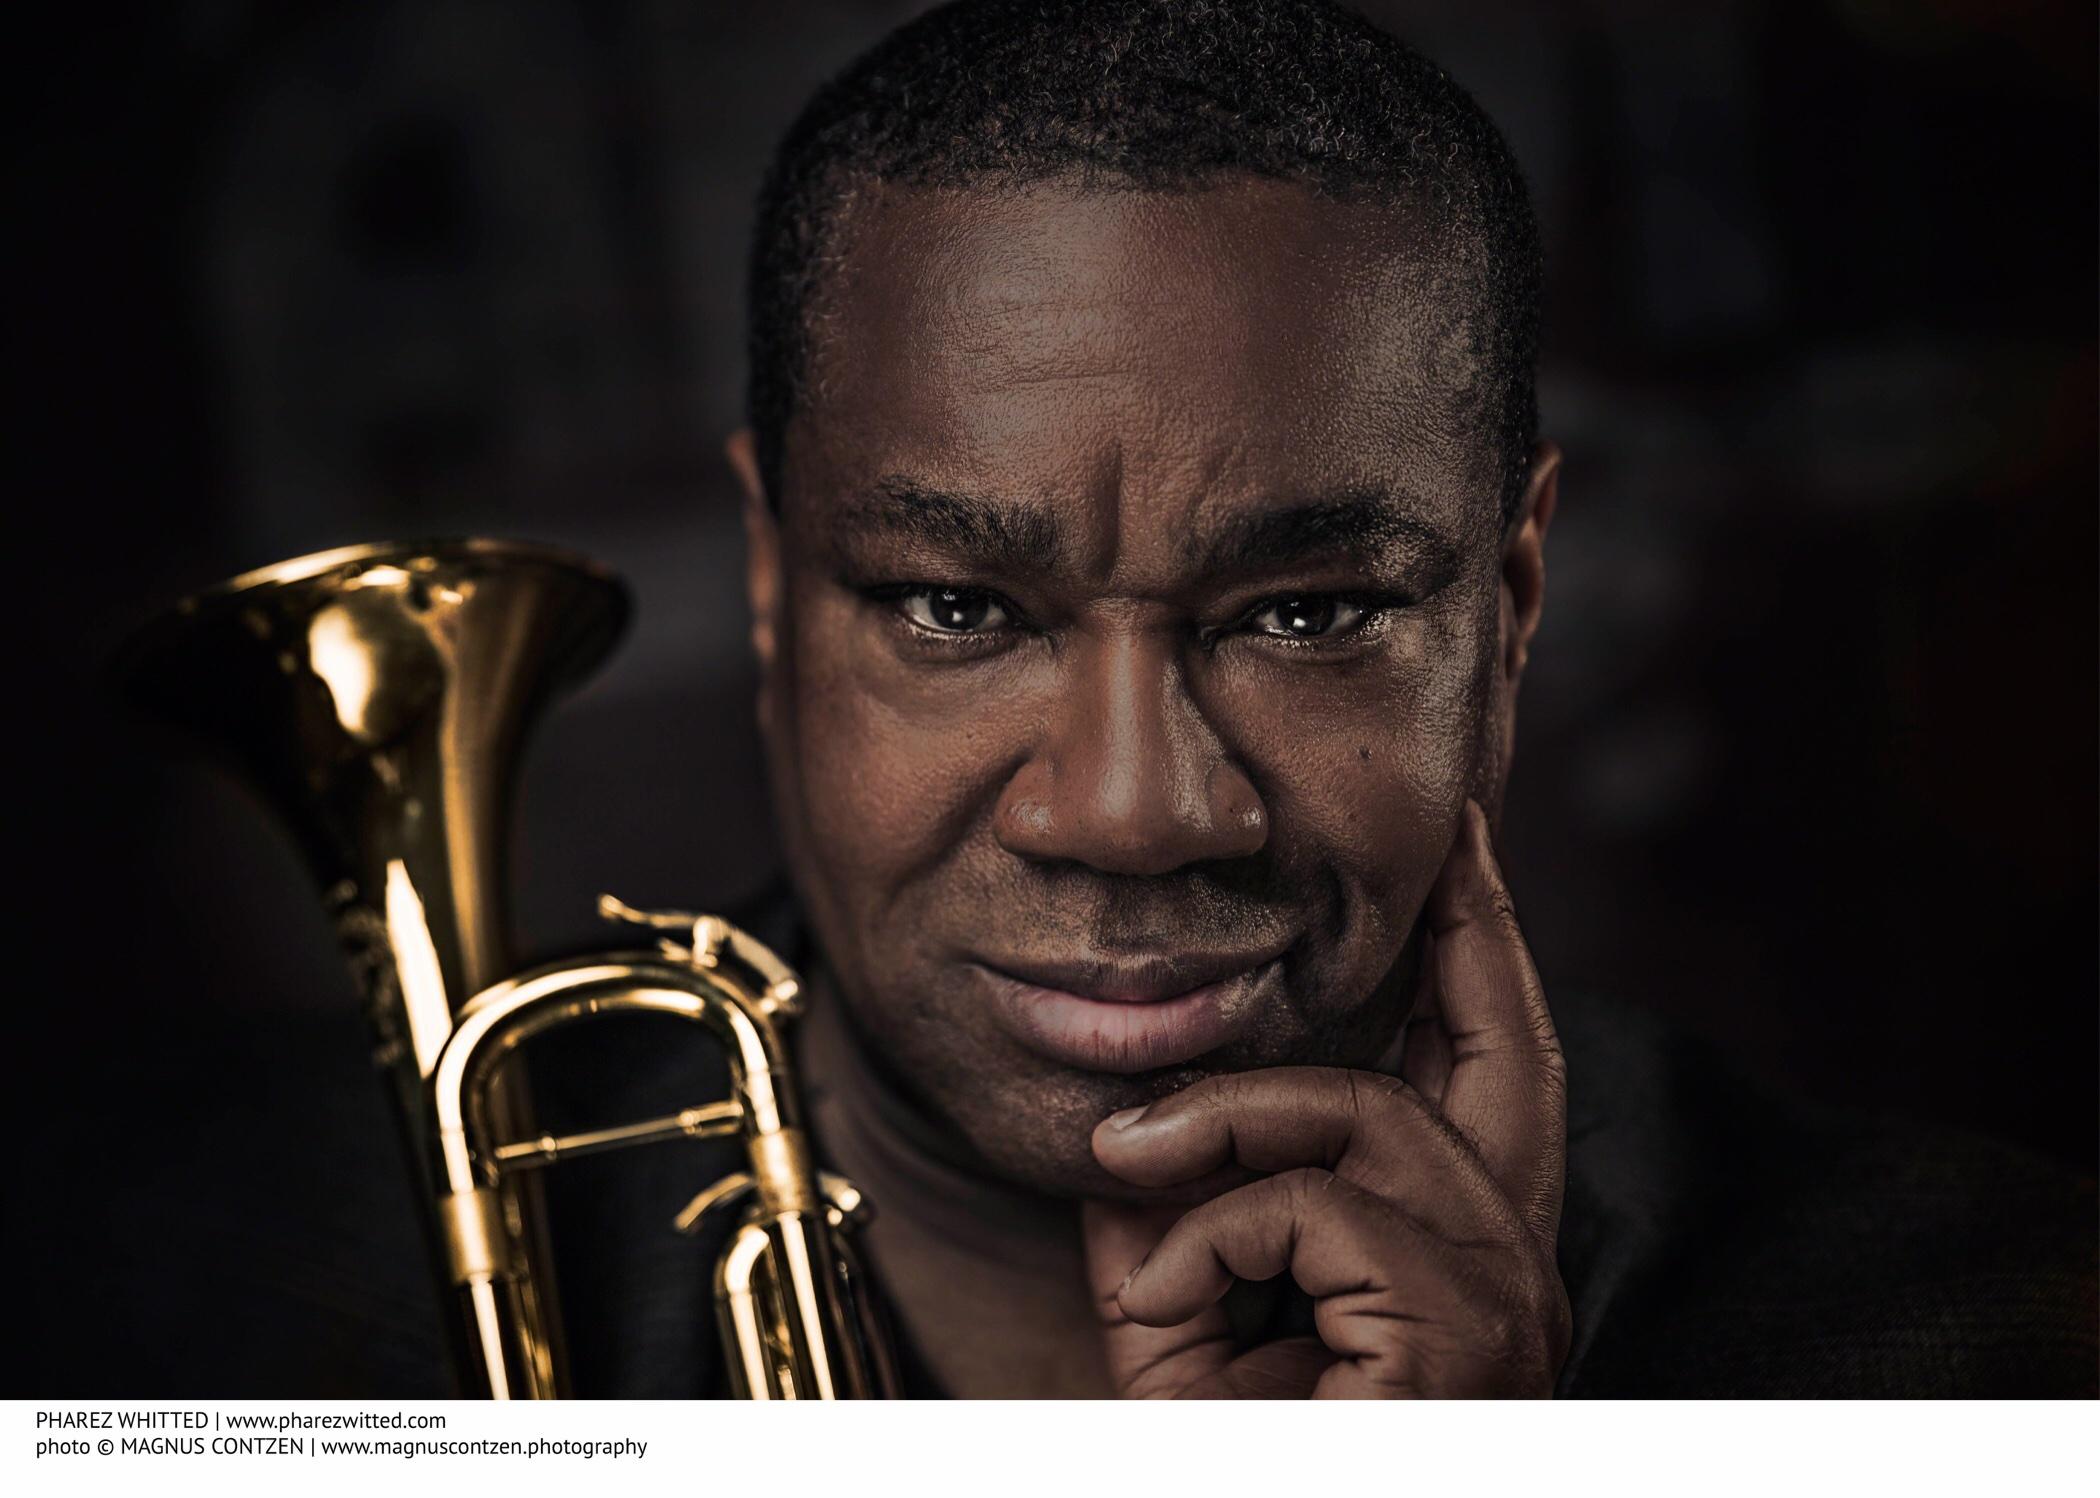 A black man smiles, posing with the bell end of a trumpet on his right. He rests his face on his left hand and looks directly at the camera, his brow furrowed.